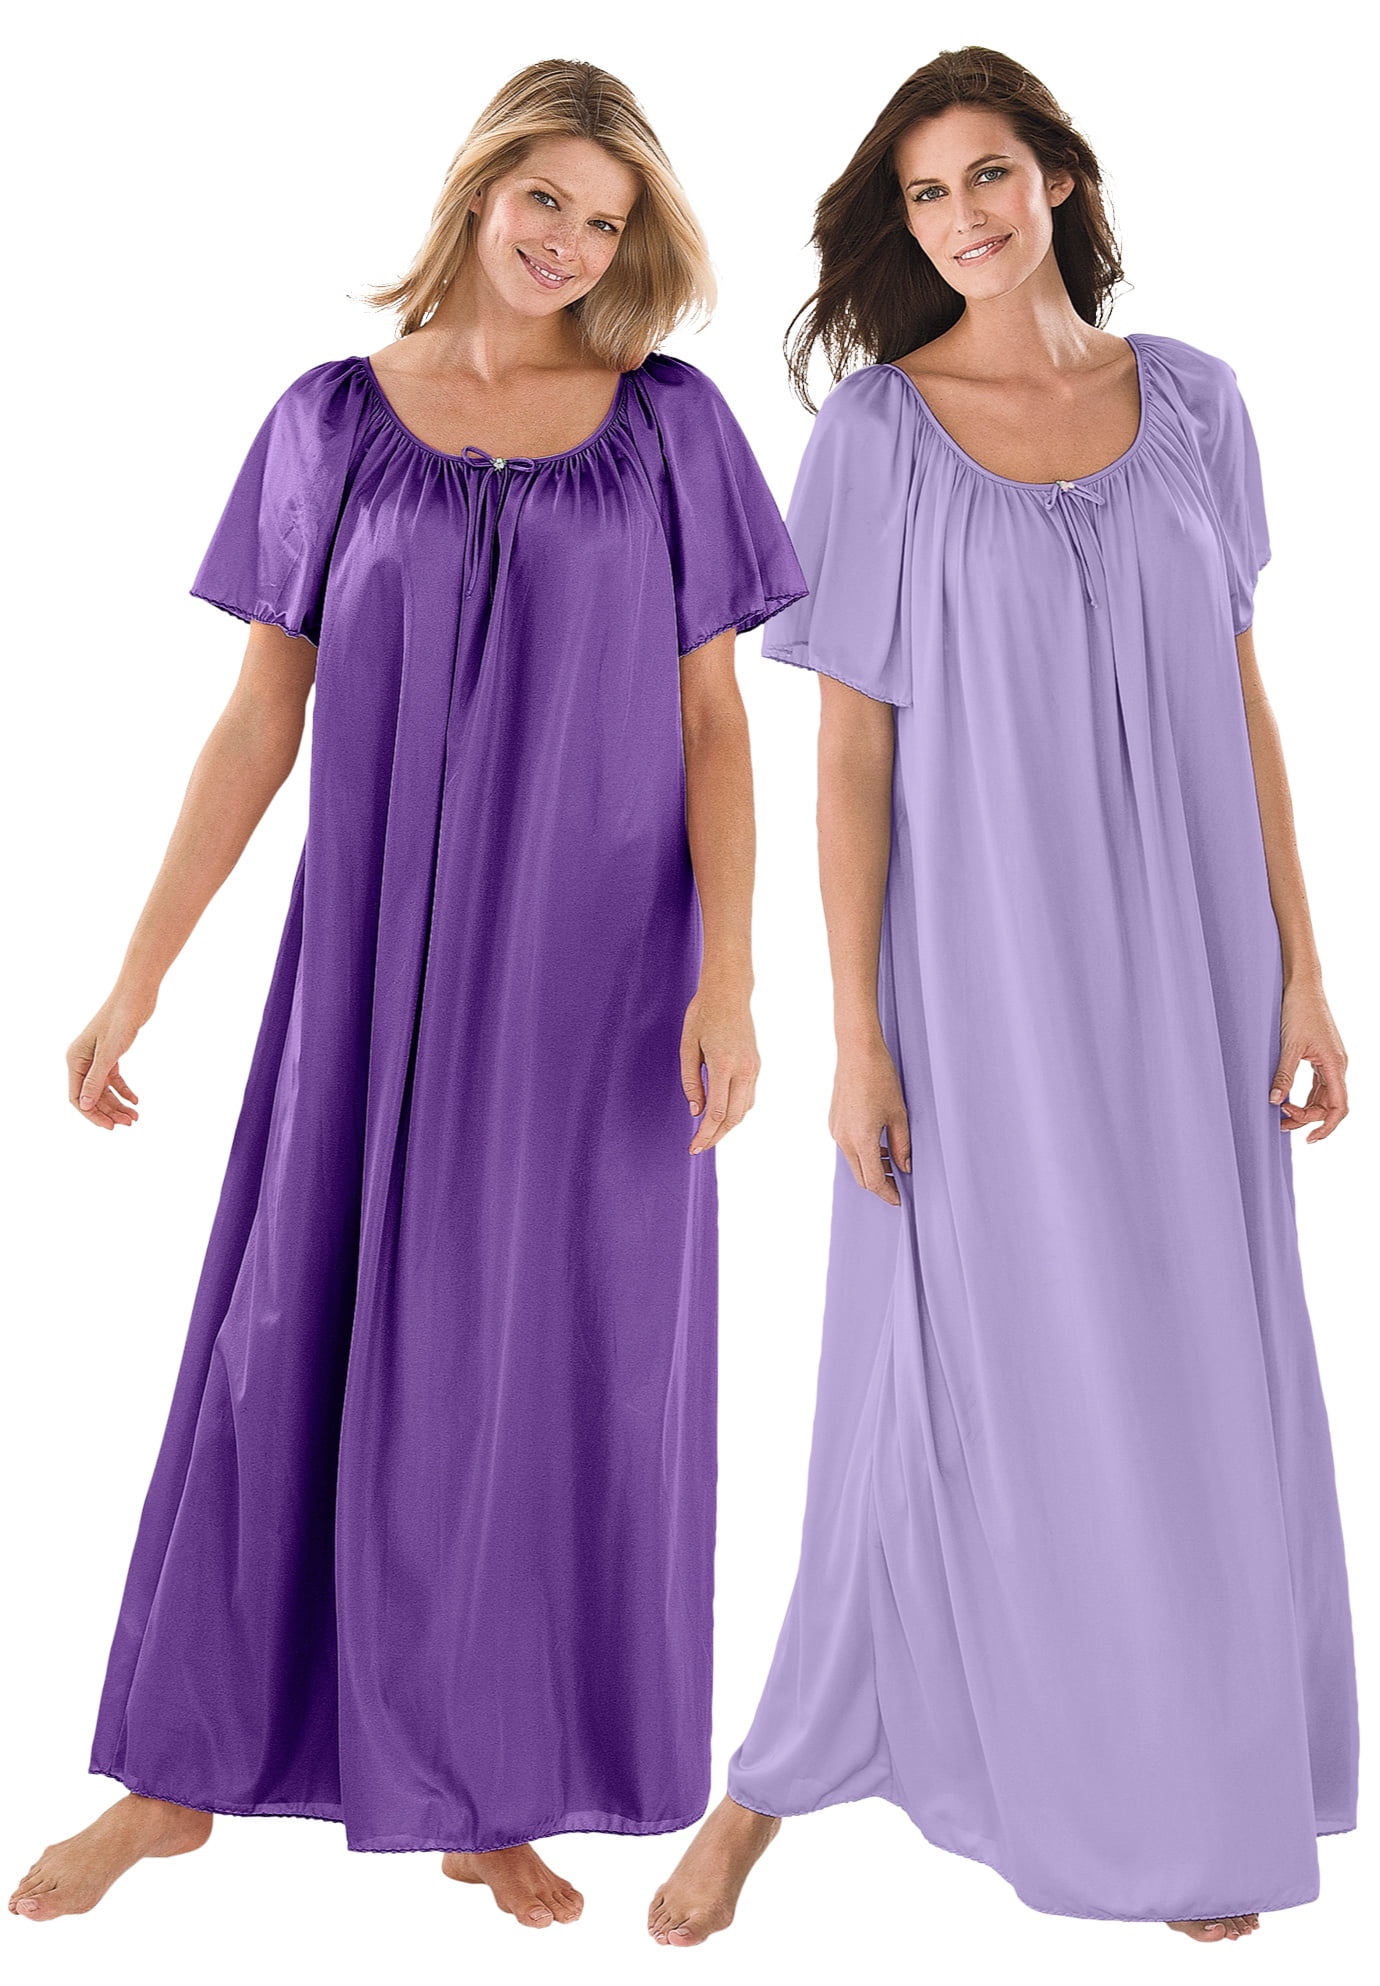 Only Necessities Womens Plus Size 2 Pack Long Silky Gown Plus Size Sleep And Lounge